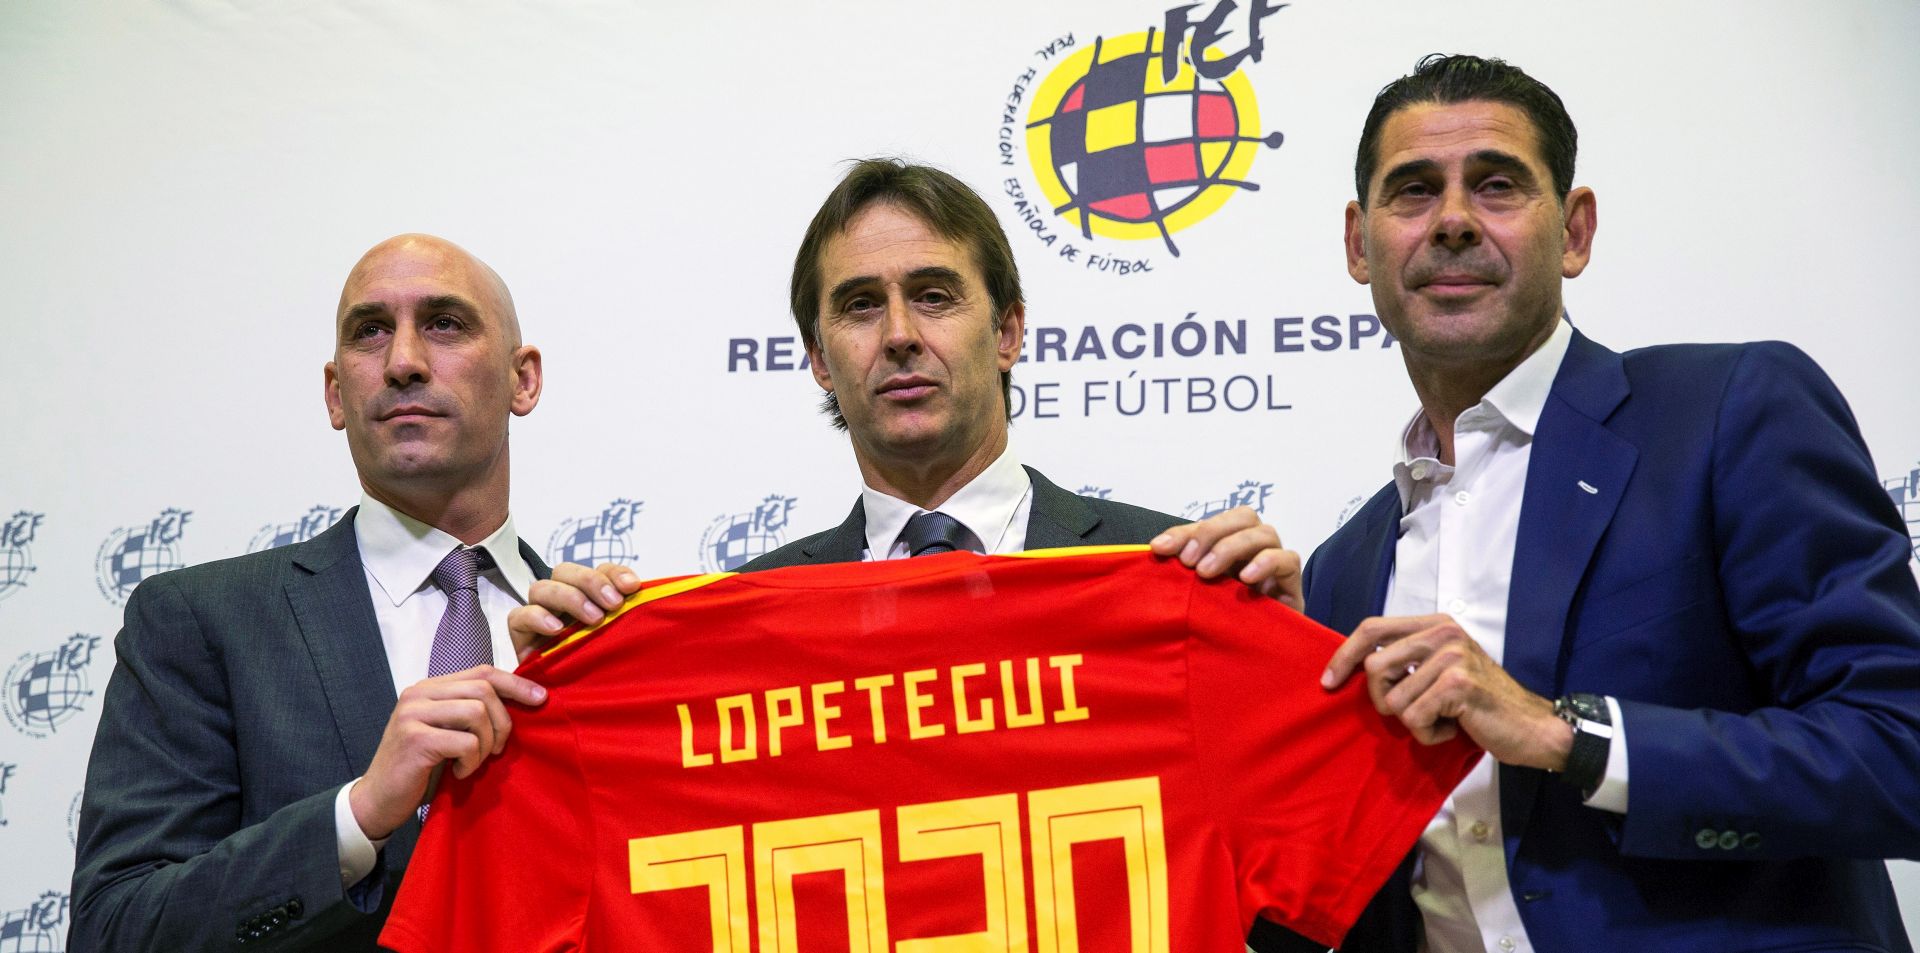 epa06755430 Spanish national soccer team head coach Julen Lopetegui (C) poses for photographers with Luis Rubiales (L), new president of the Royal Spanish Football Federation (RFEF), and RFEF sports director Fernando Hierro (R) after extending his contract in Las Rozas, Madrid, Spain, 22 May 2018. Lopetegui will lead the Spanish national soccer team for two more years until 2020.  EPA/RODRIGO JIMENEZ